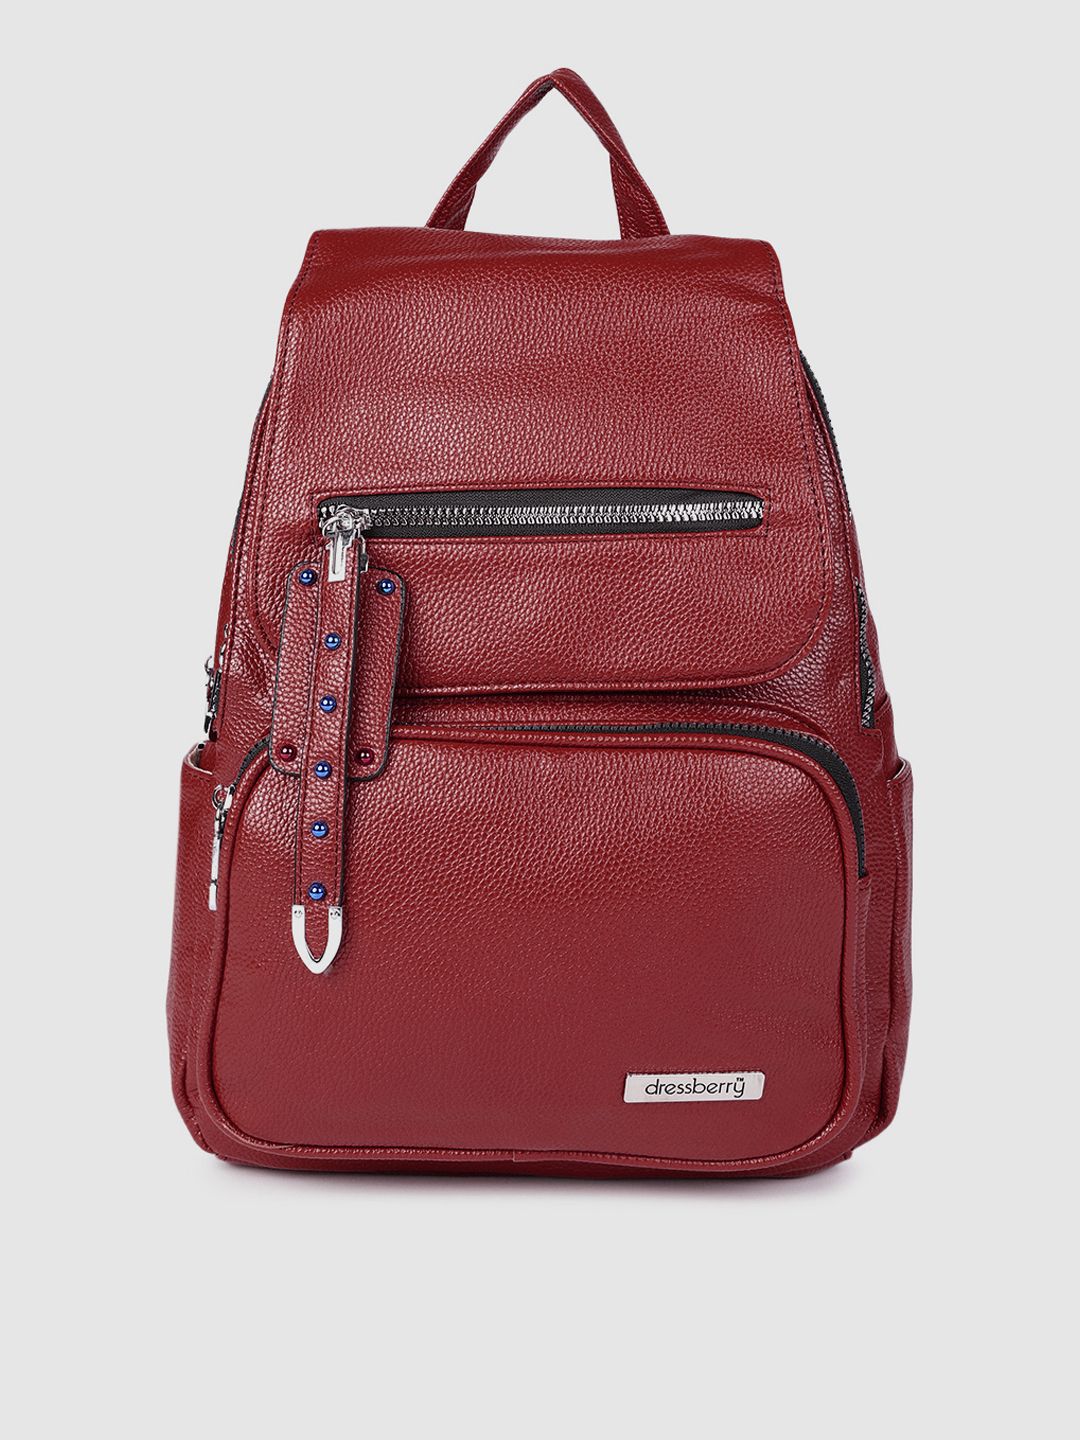 DressBerry Women Maroon Backpack Price in India